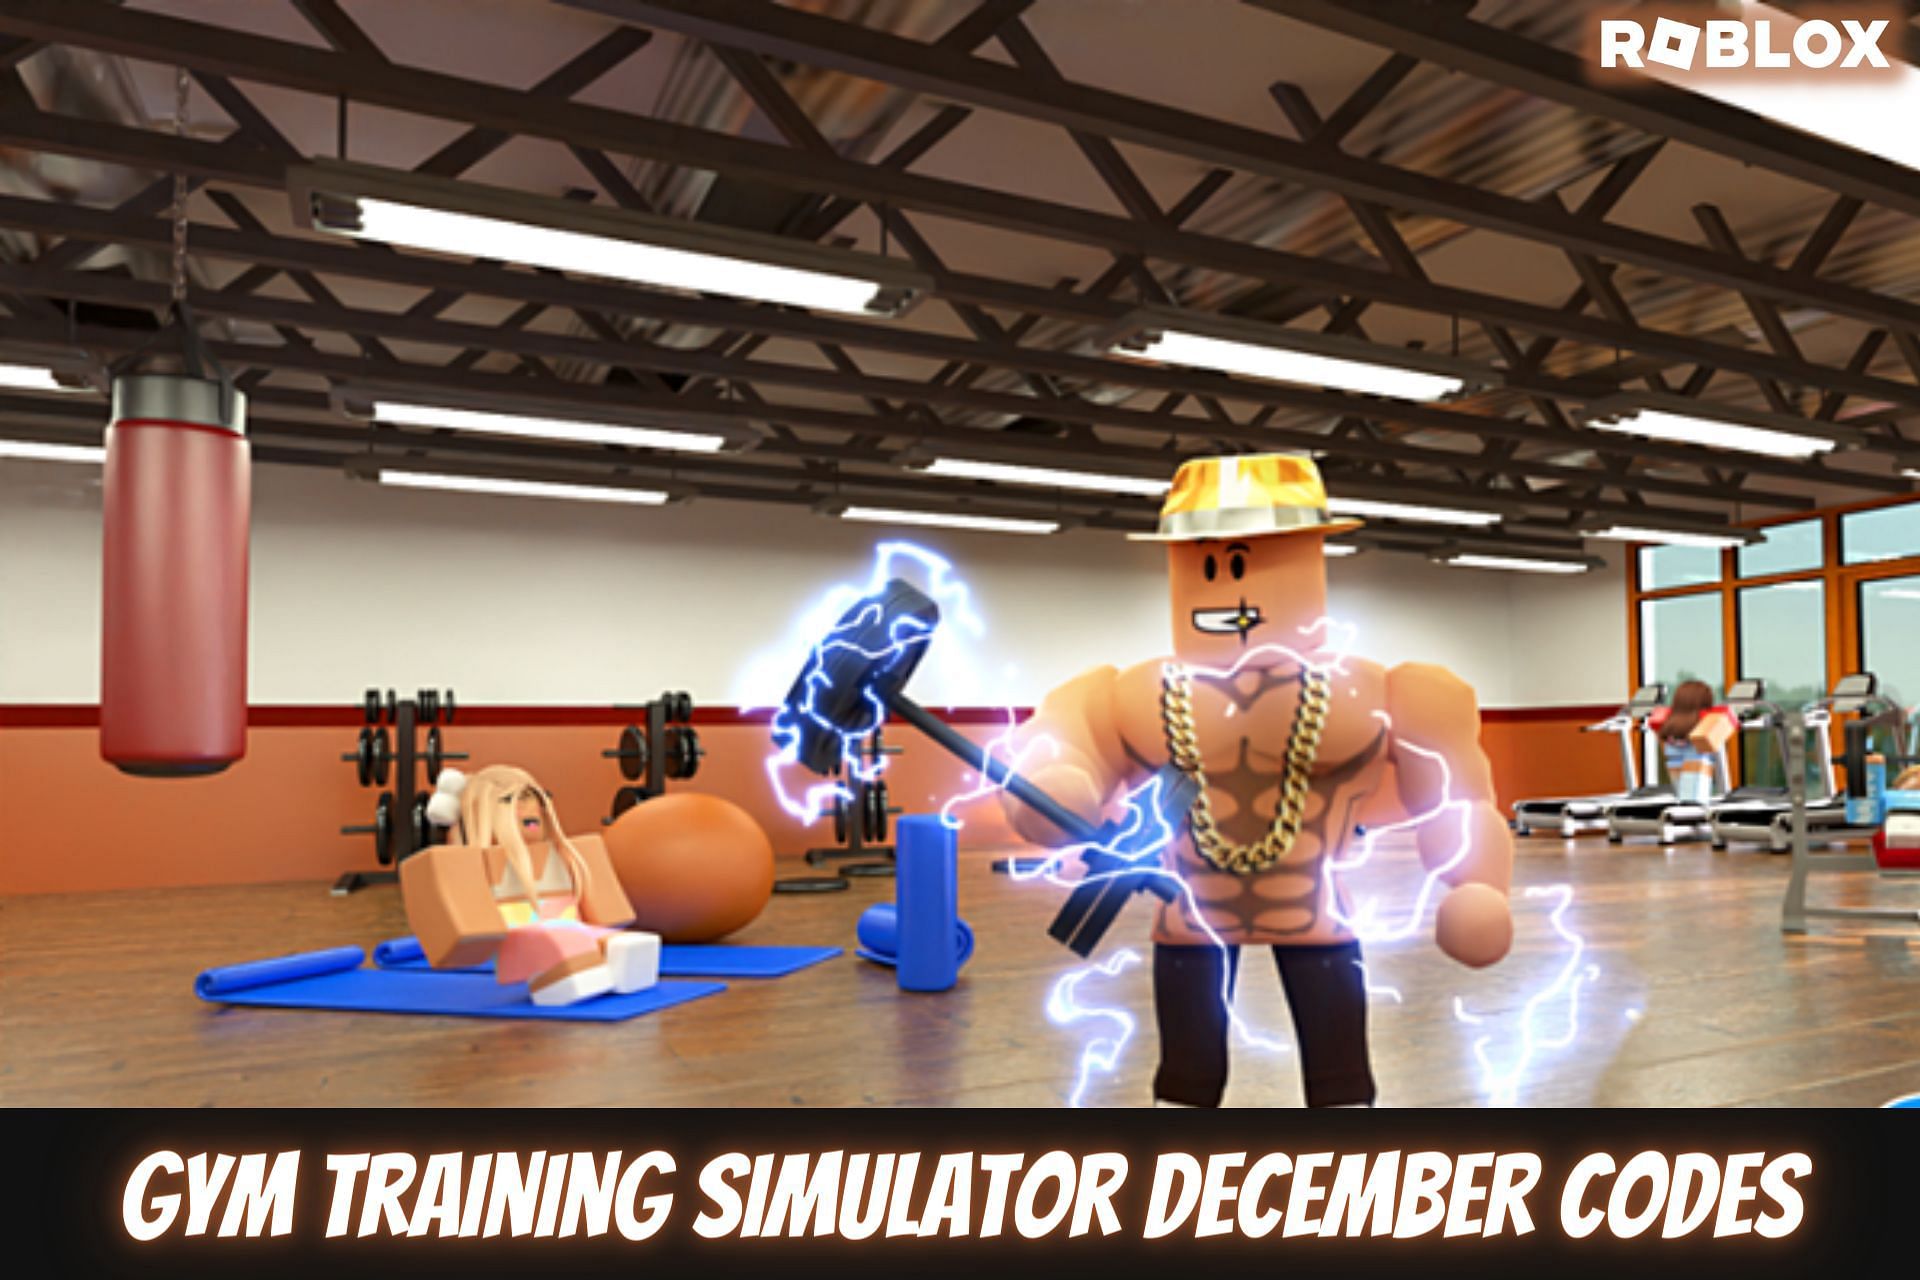 Keep training until you have the perfect body (Image via Roblox)